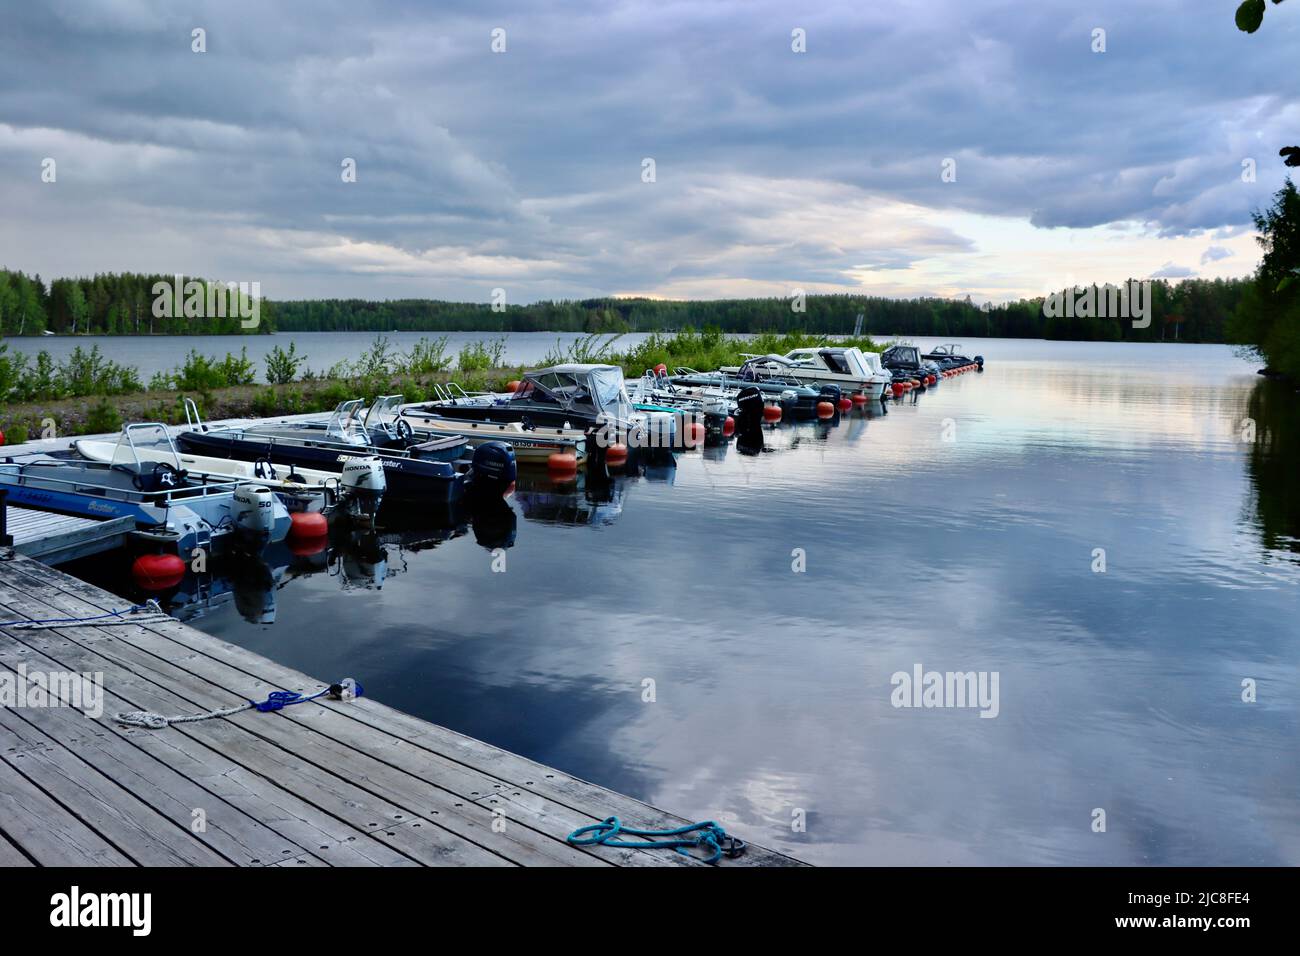 Boats of people with summer houses near the border zone on Lake Pyhäjärvi on the Finland side of the Finland-Russia borden Stock Photo